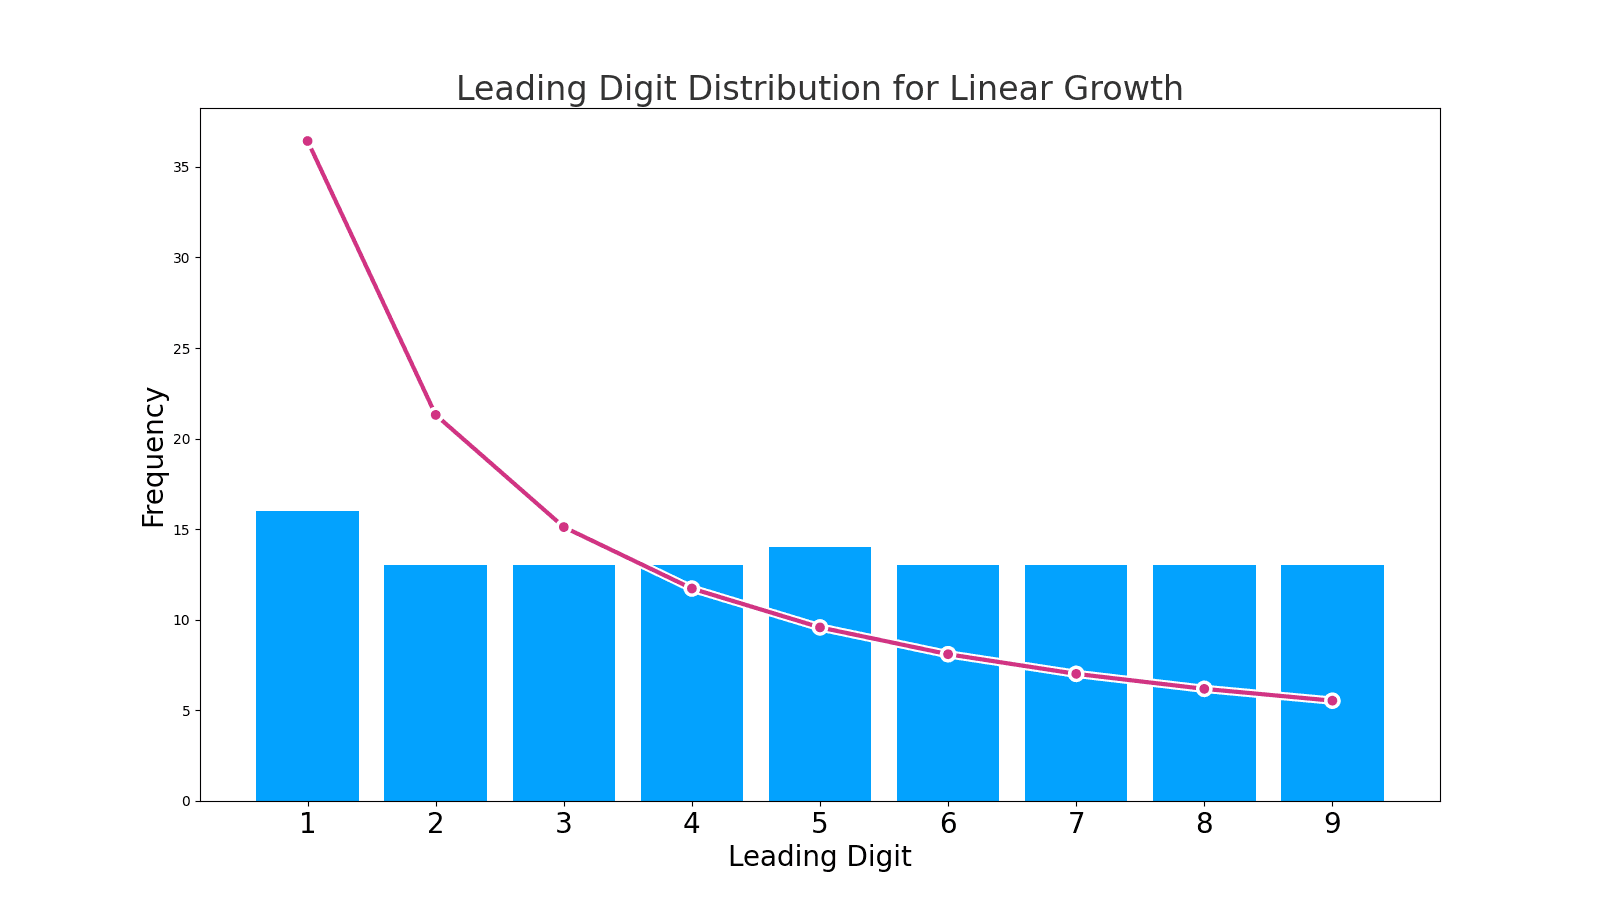 The lead-digit breakdown for a simulated linear growth rate.